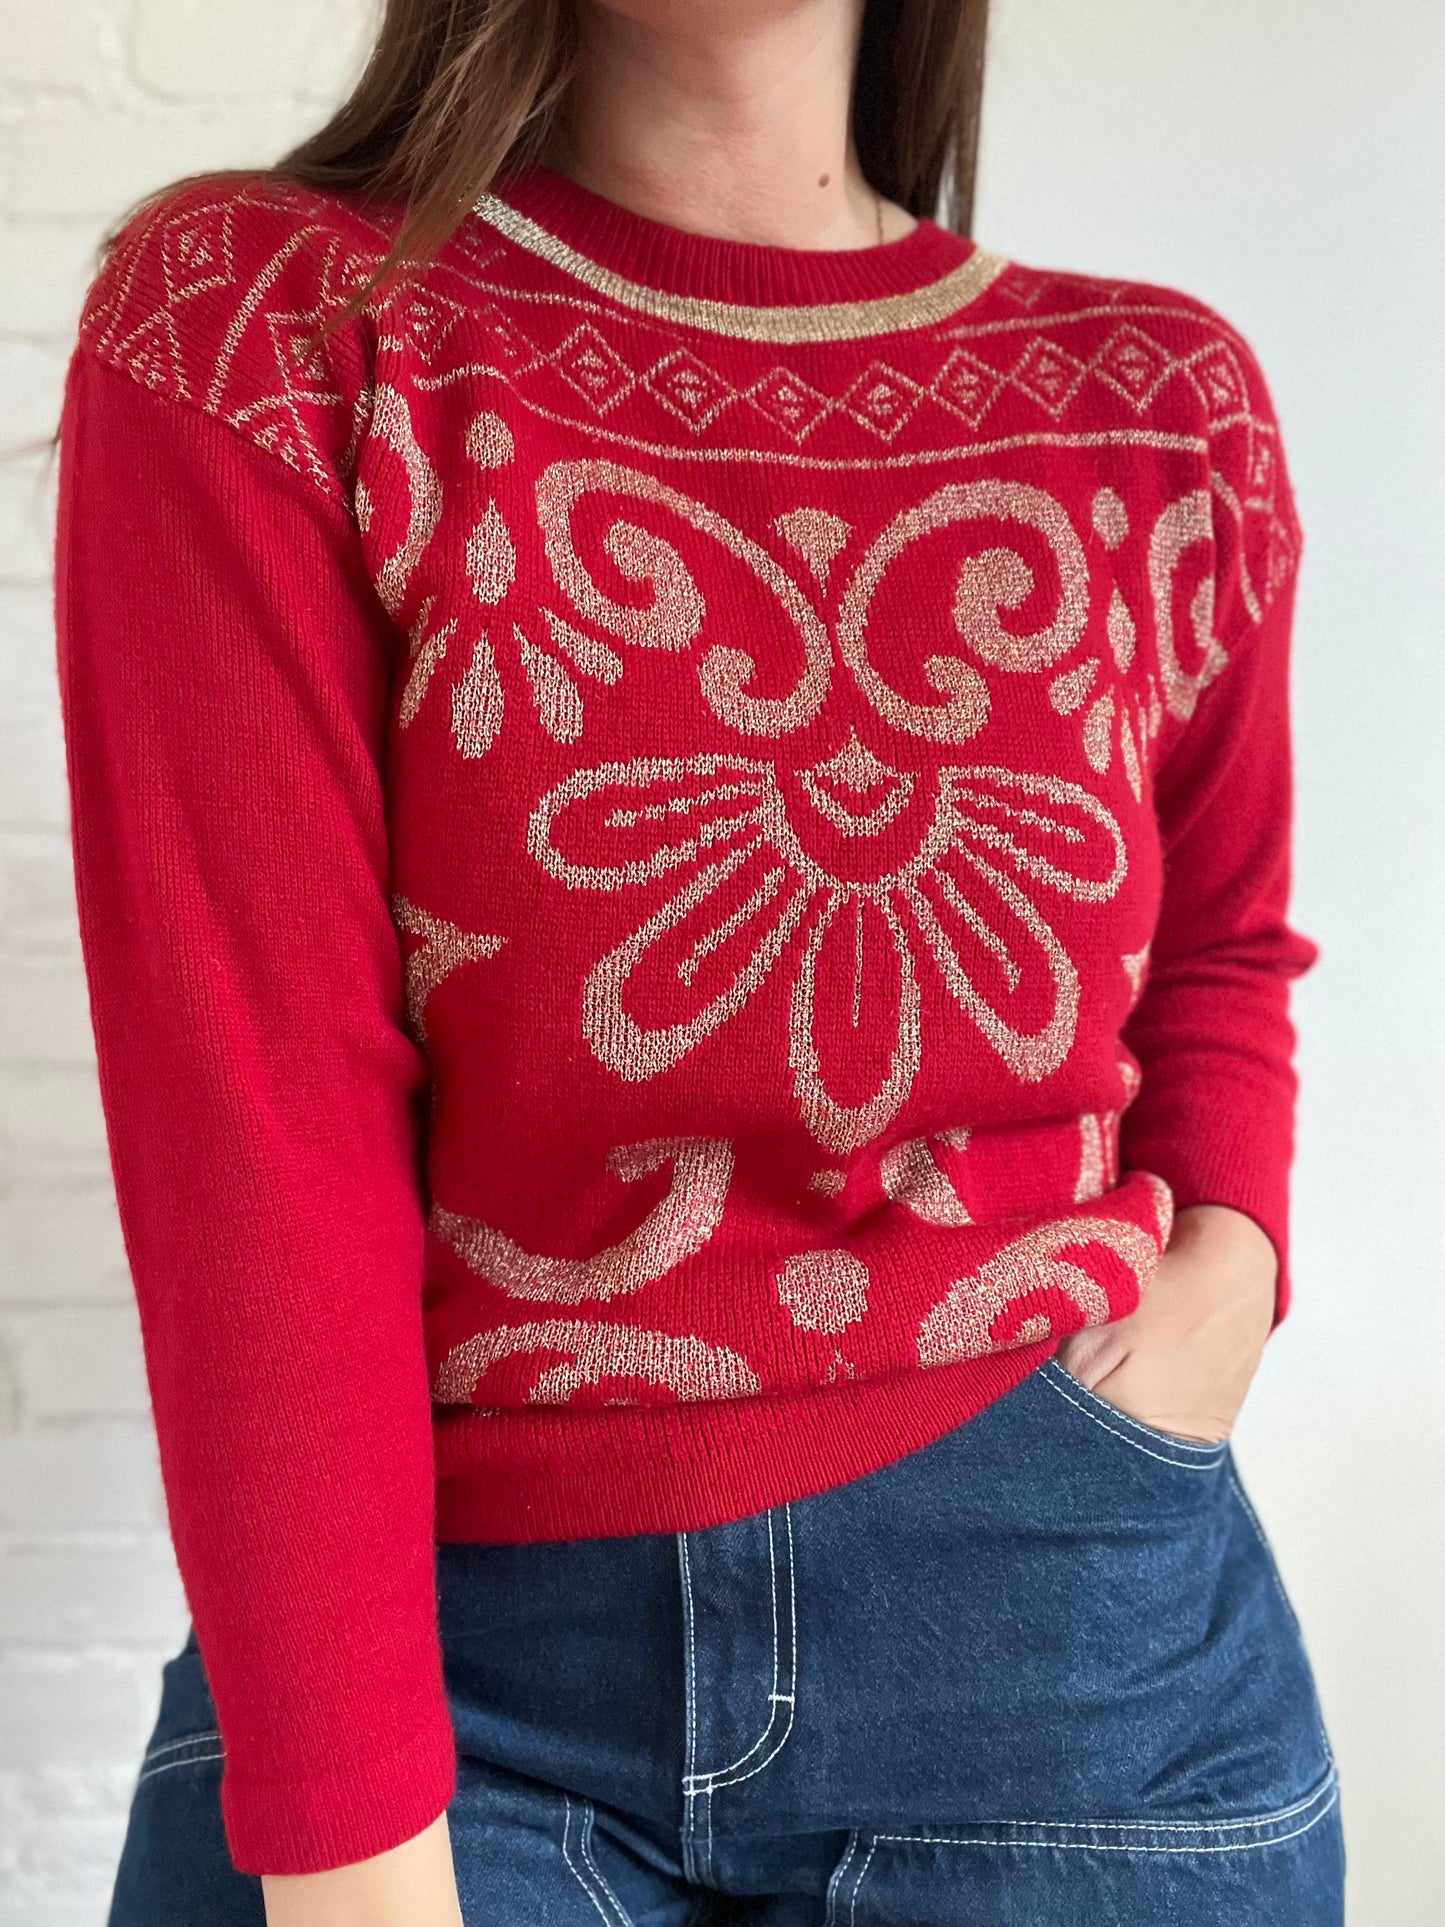 Red and Gold Metallic Sweater - M/L